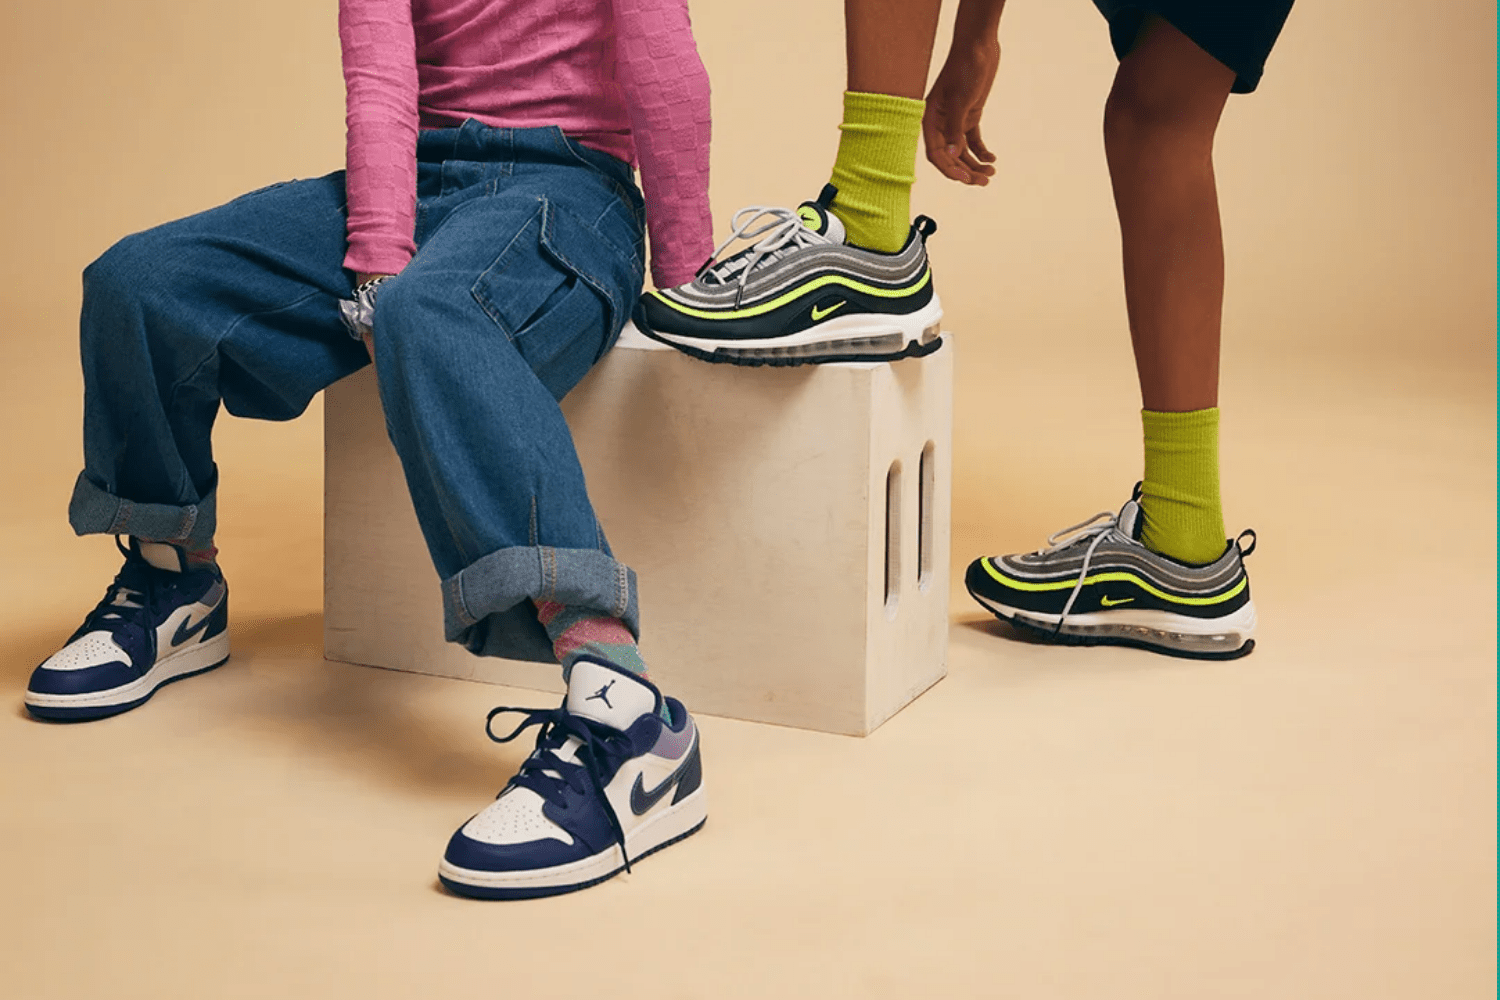 Don't miss out on the great range of trend sneakers for kids at Foot Locker